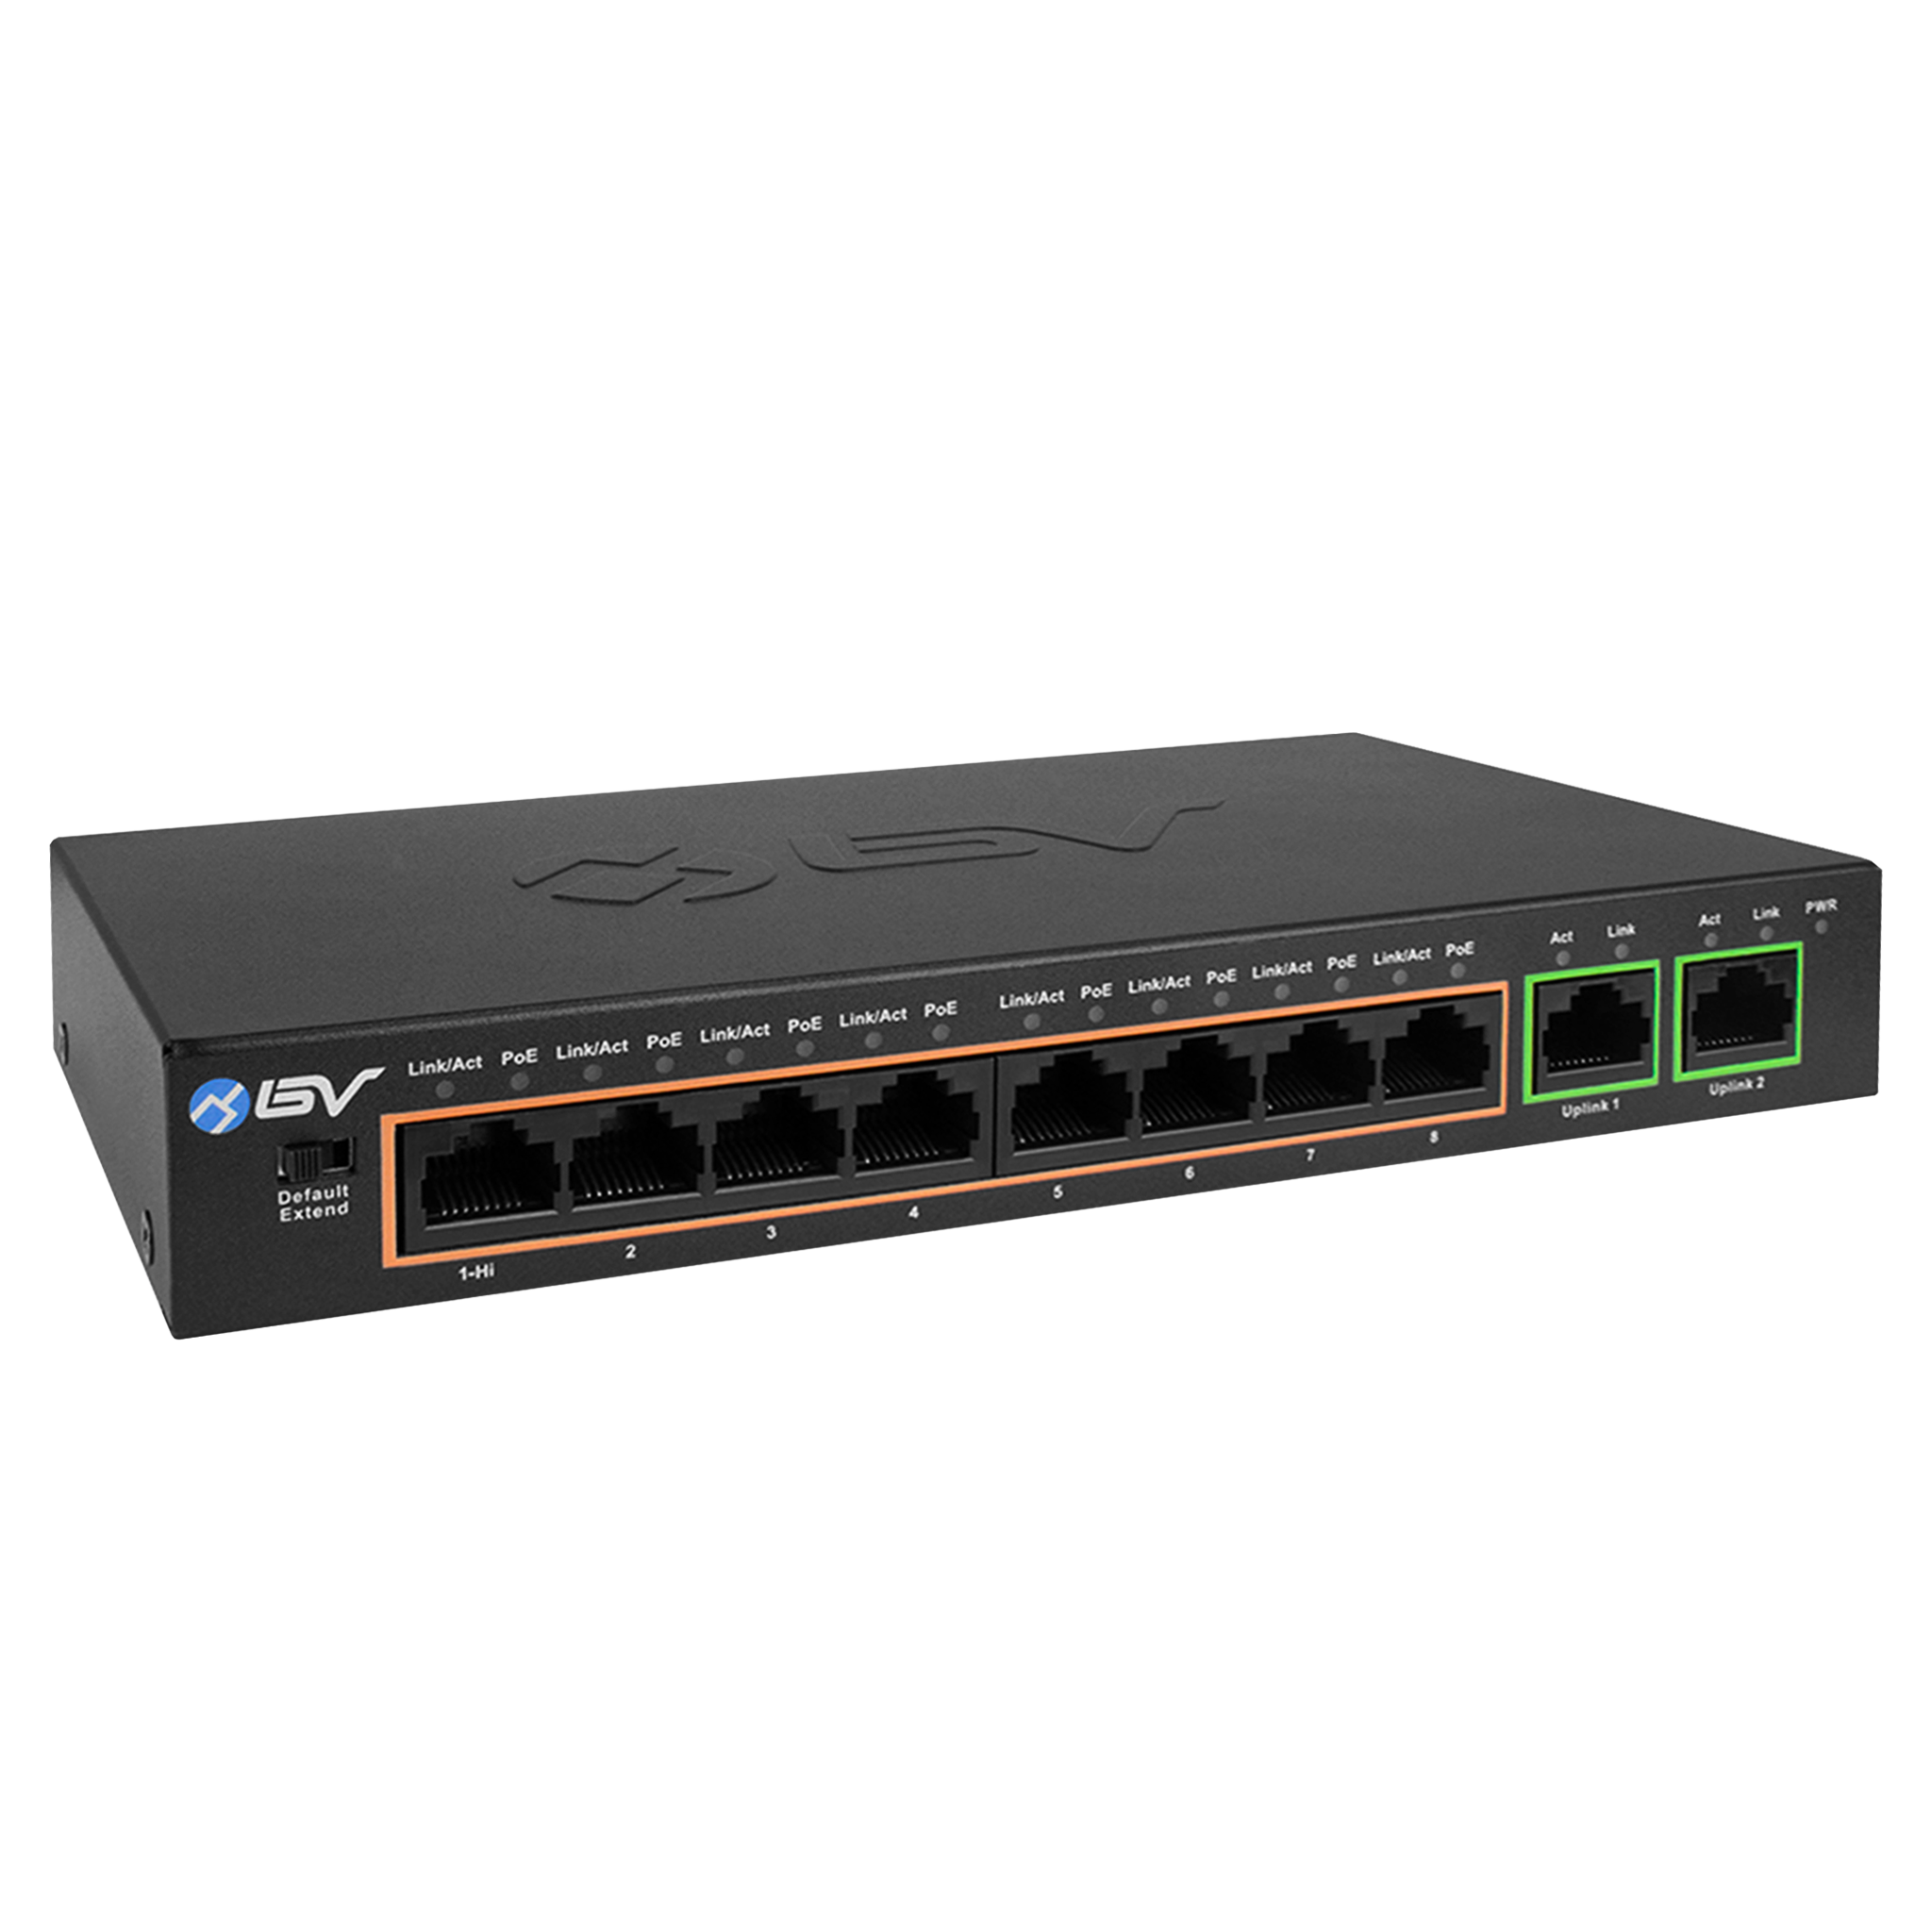 Industrial 8 + 2Port Gigabit PoE+ Switch - Ethernet Switches, Networking  IO Products